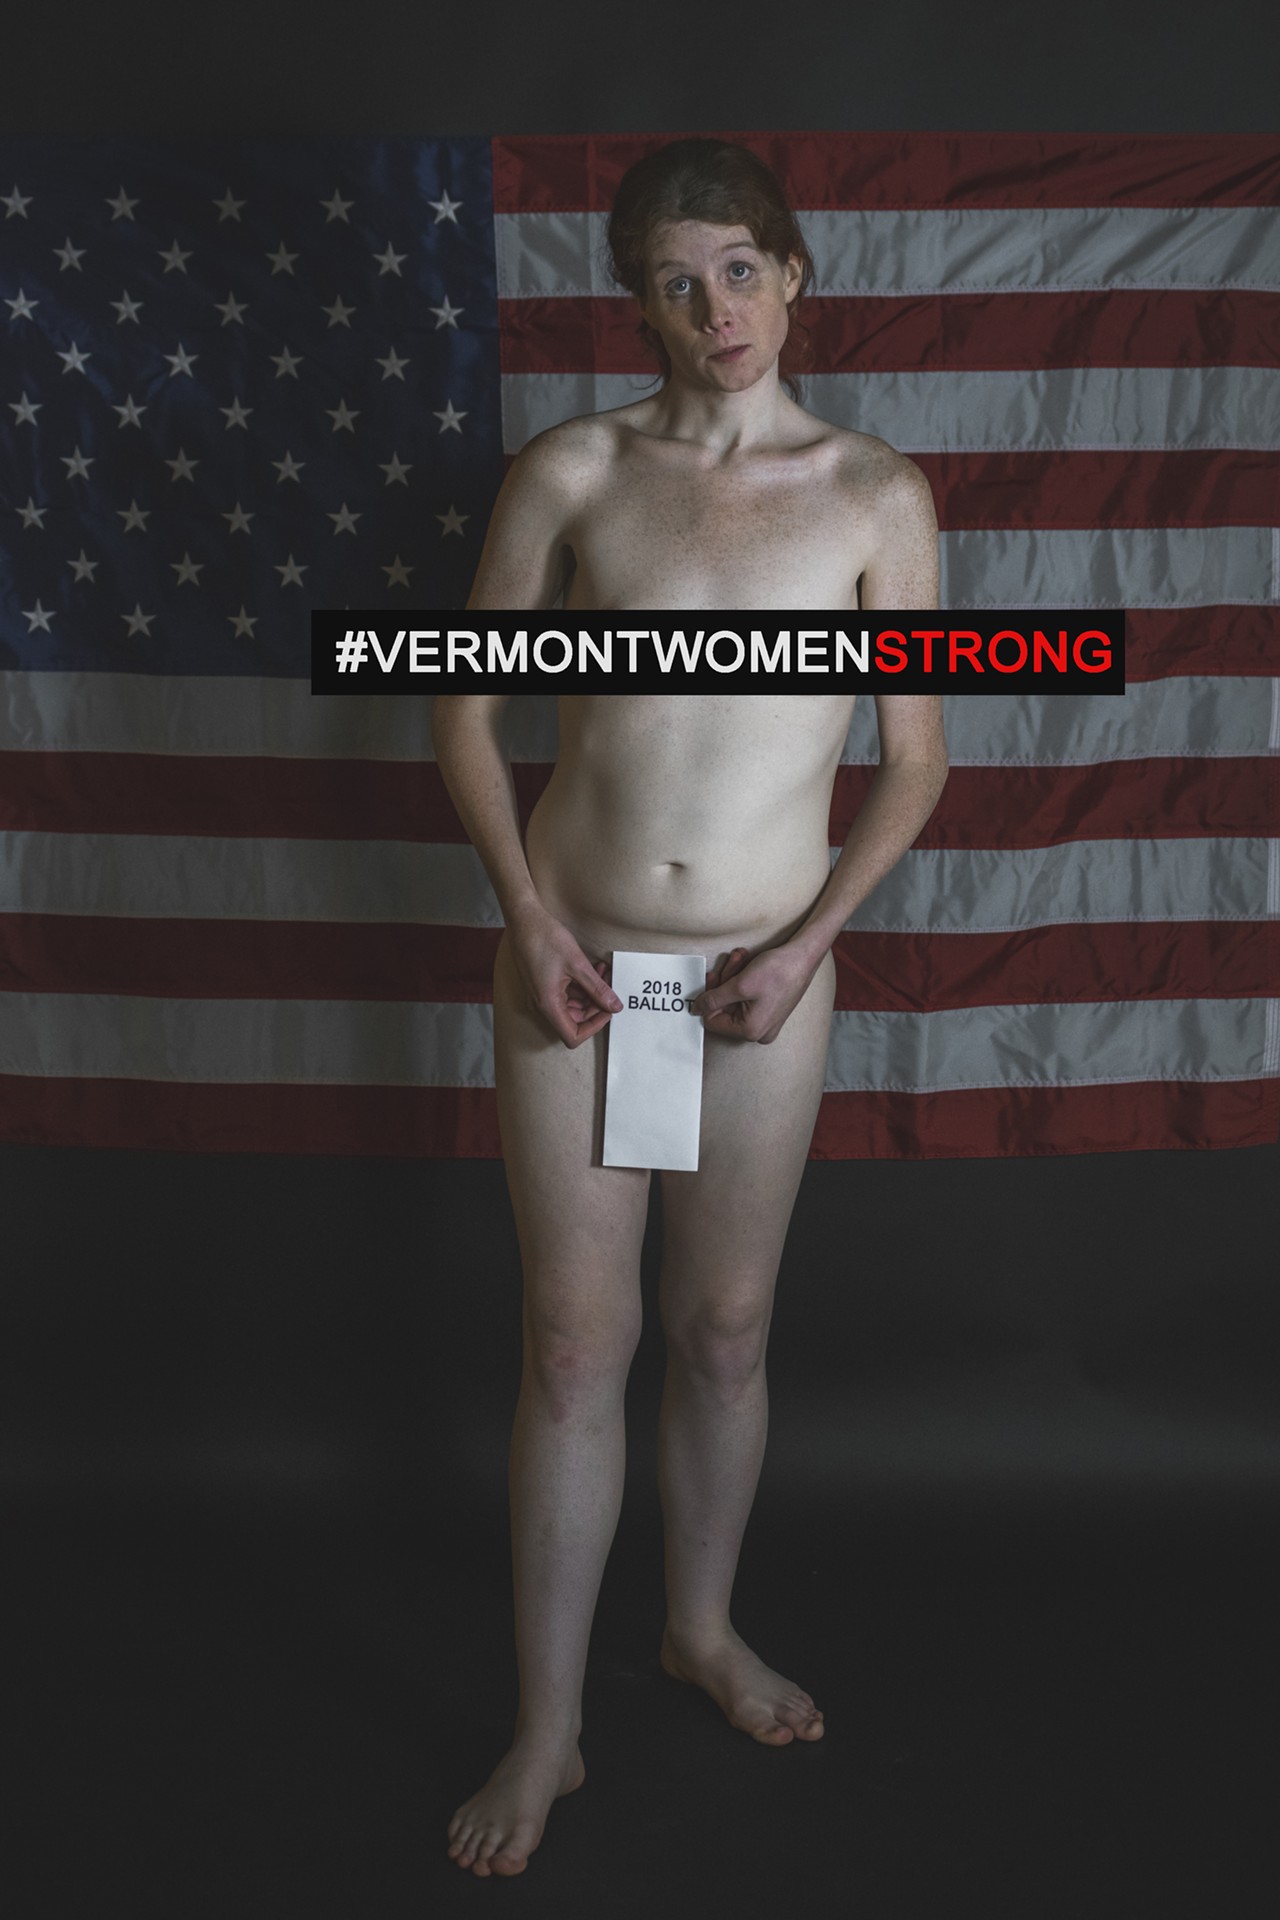 Women Pose Naked in "Grab Them By The Ballot" Campaign to Get People to Vote